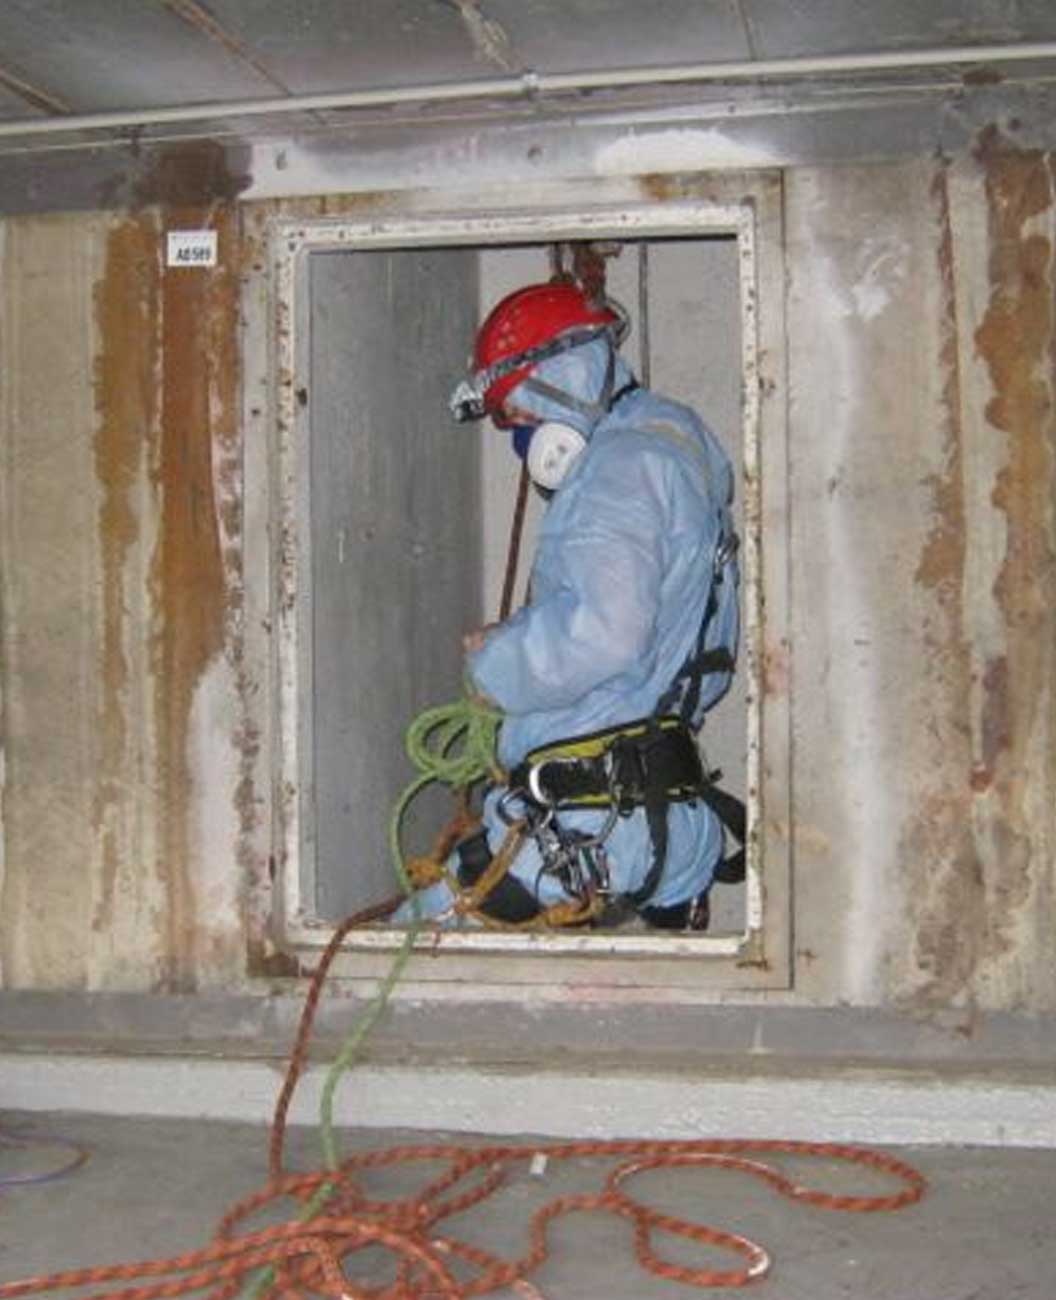 Asbestos inspections in ductwork